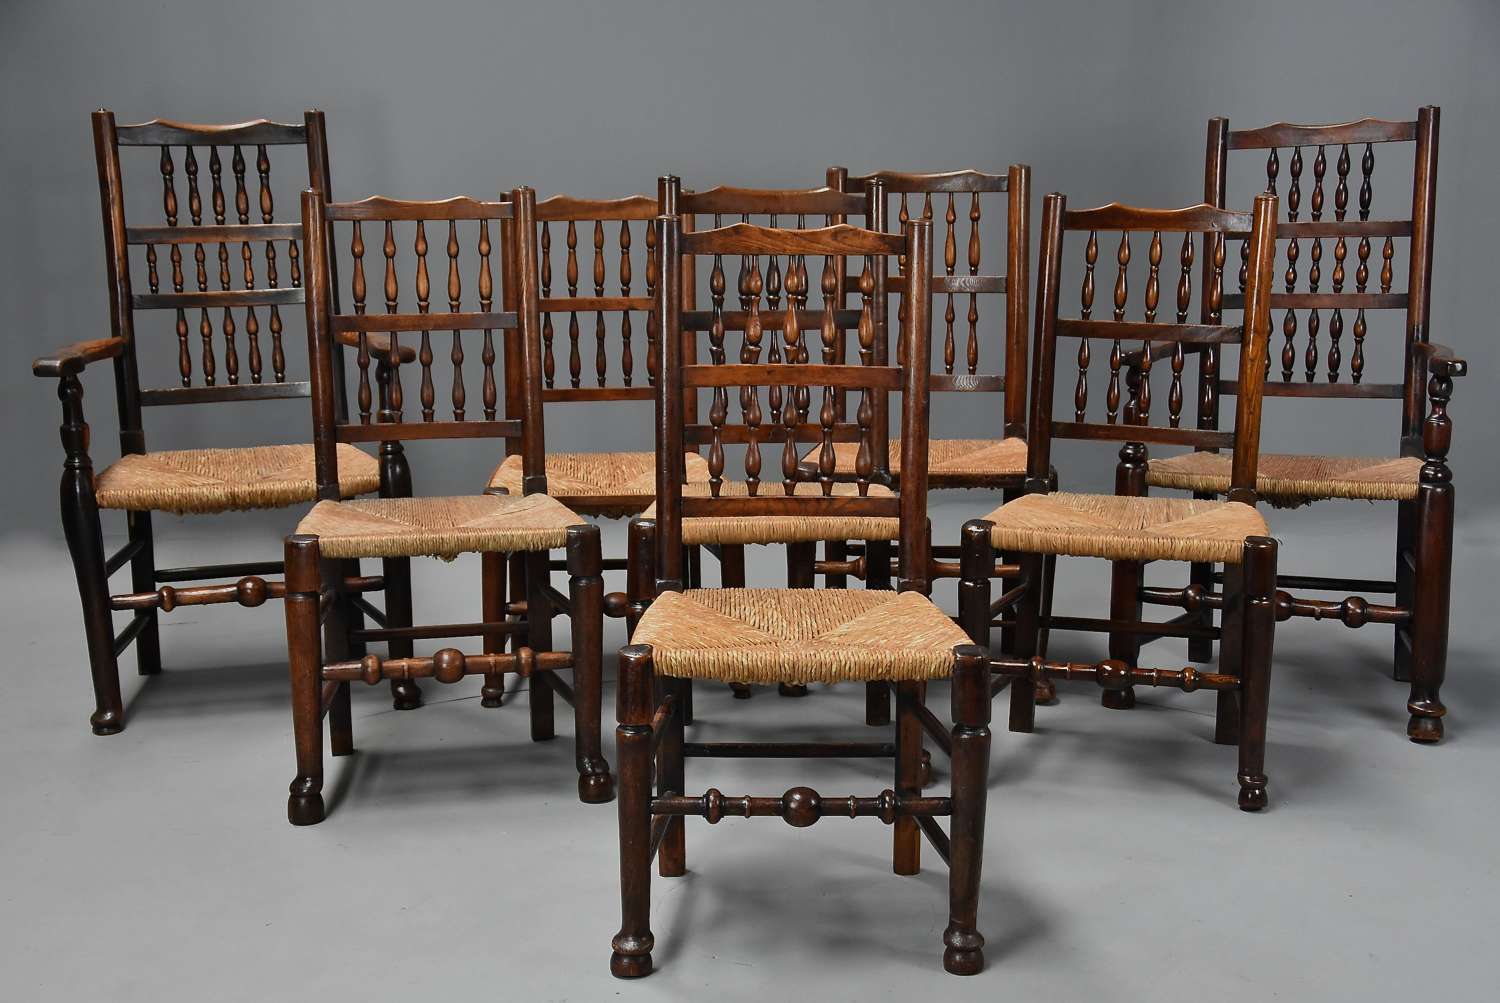 Matched set of eight mid 19thc ash, elm & sycamore spindle back chairs